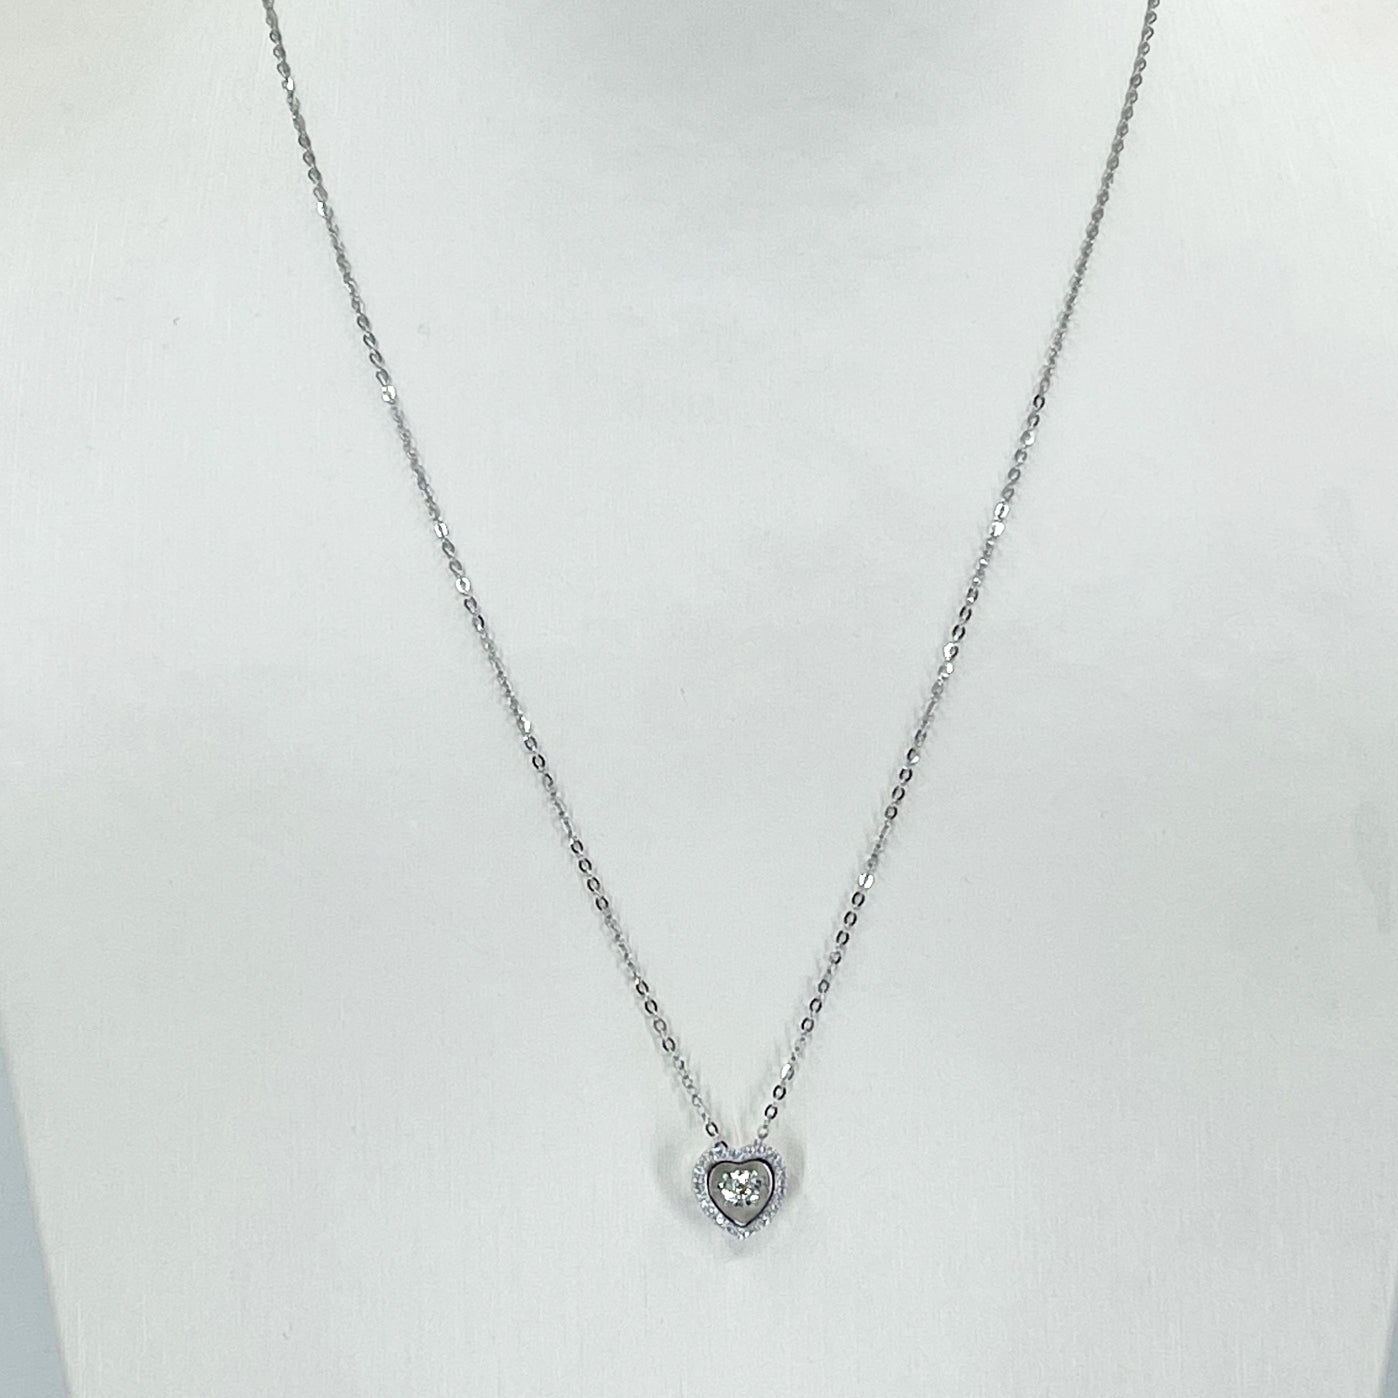 18K Solid White Gold Round Link Chain Necklace with Diamond Heart Pendant 18